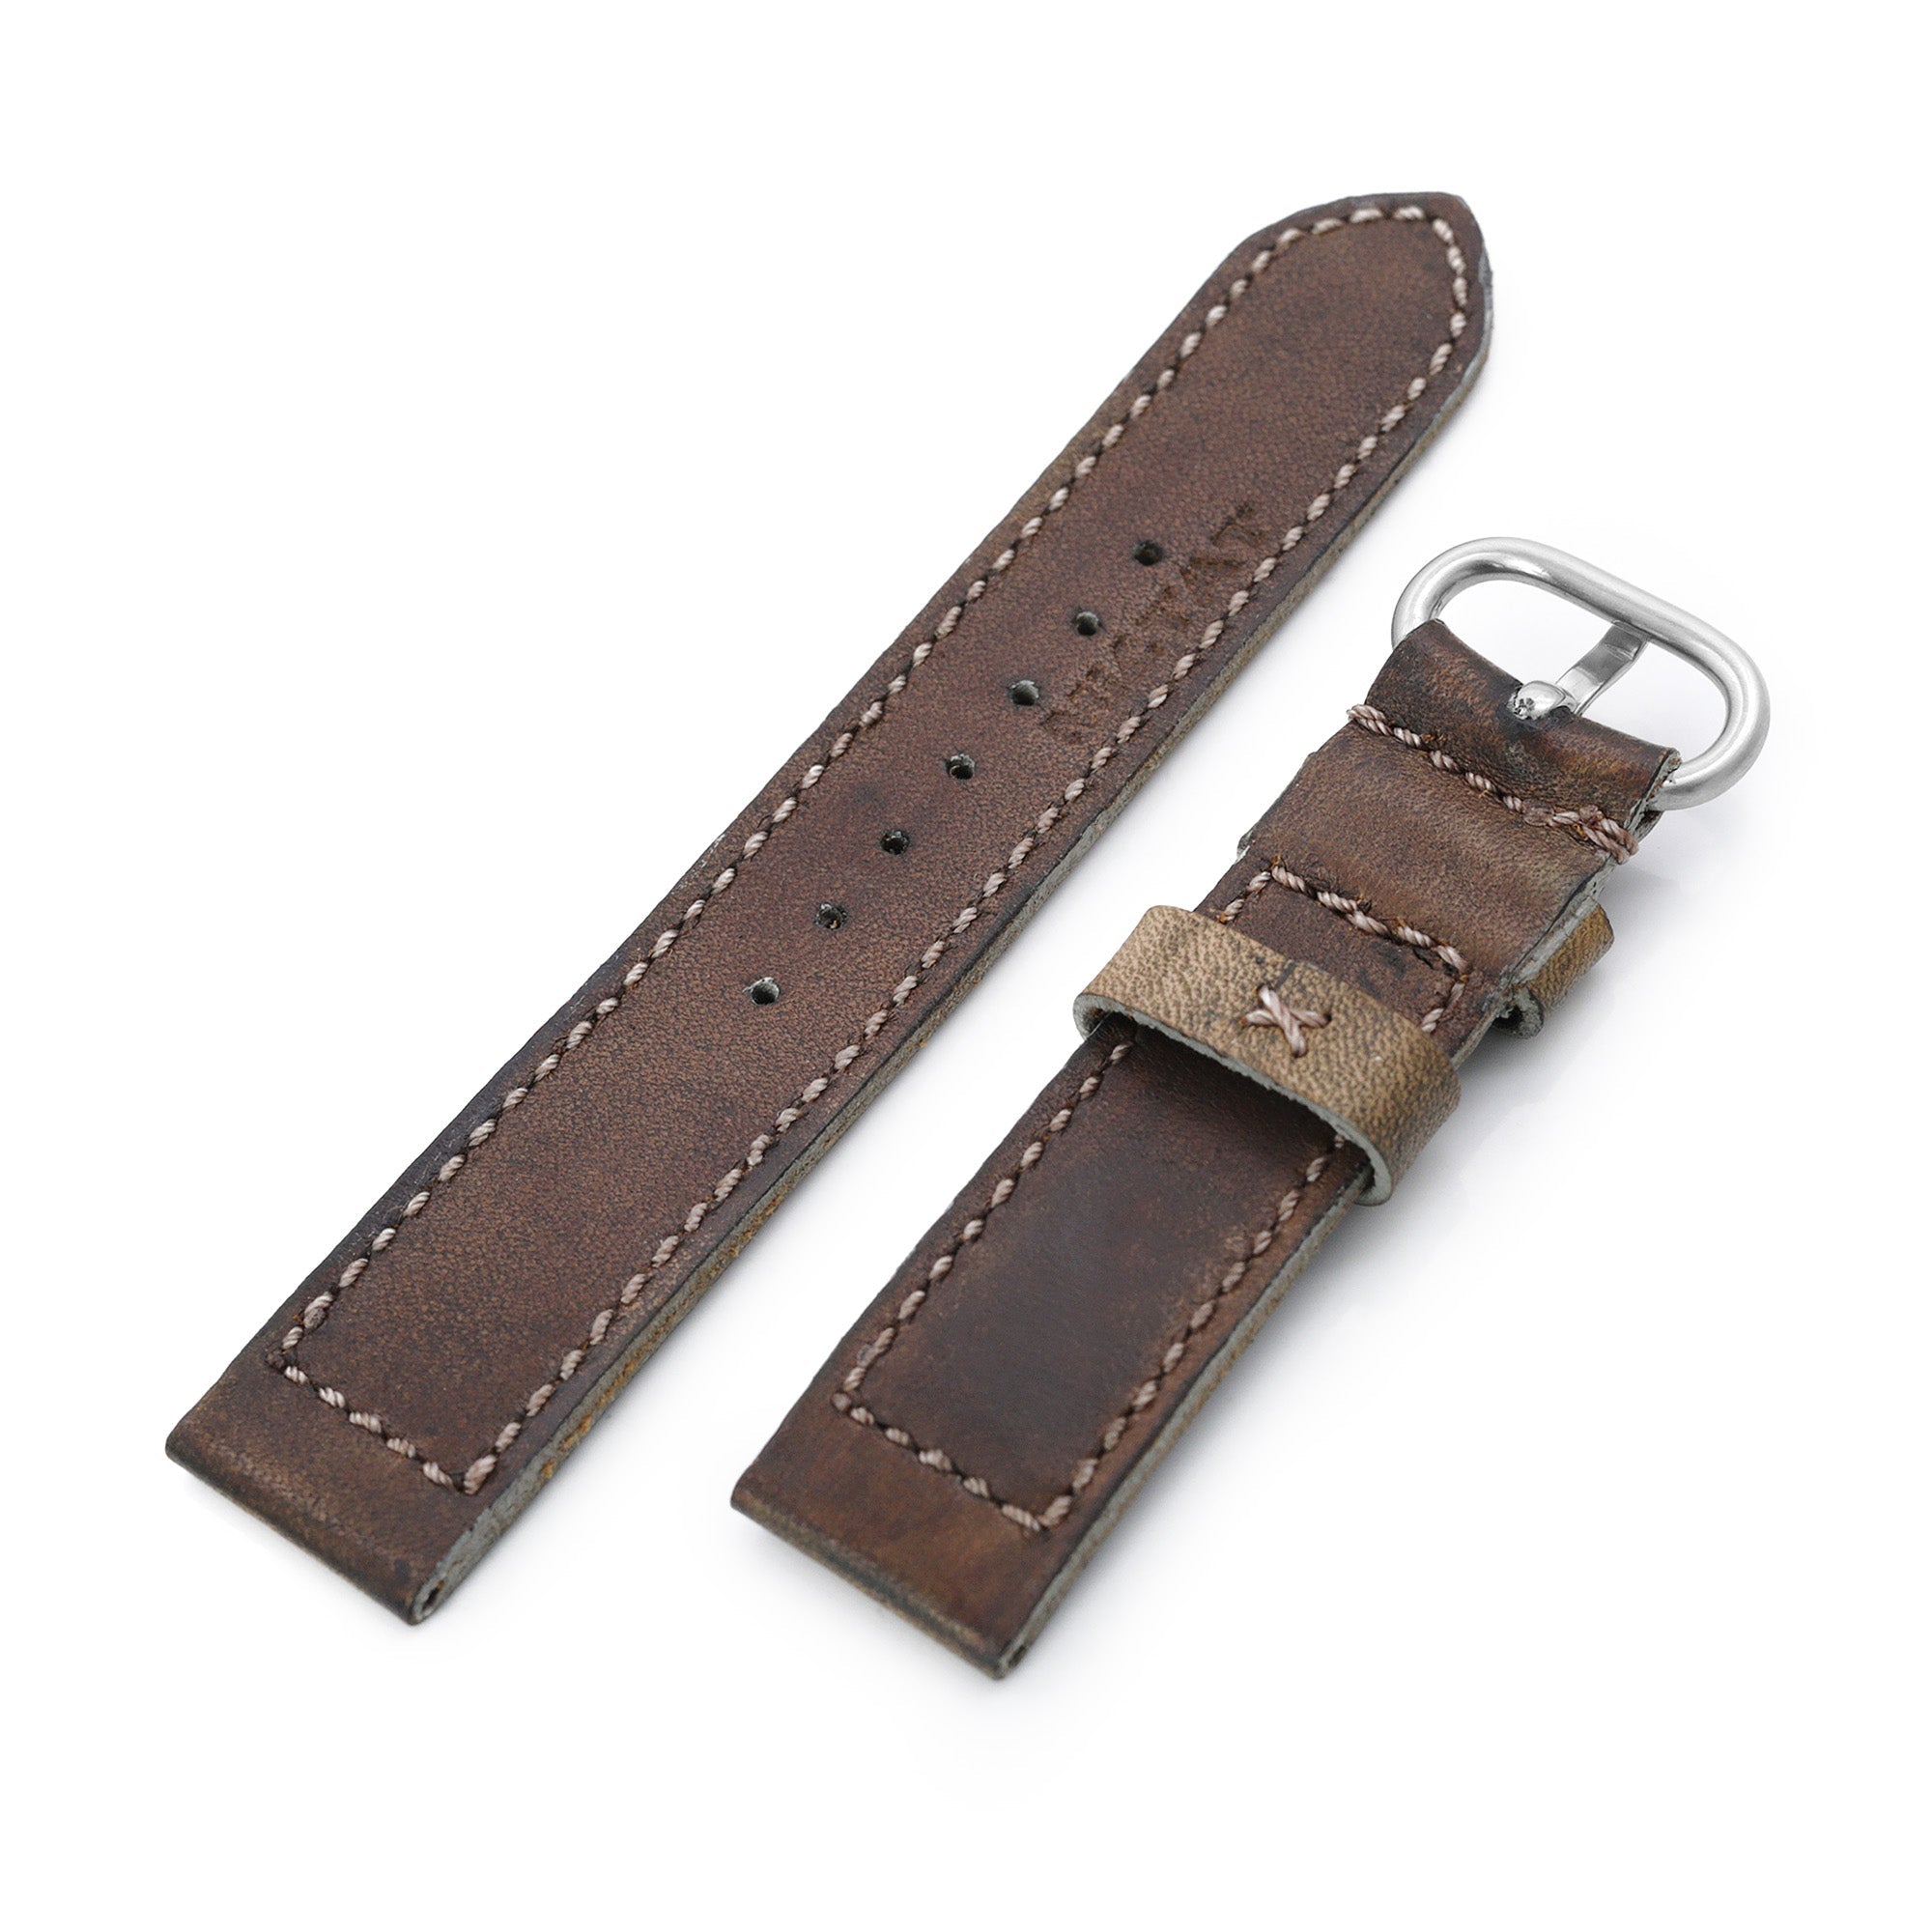 20mm Gunny X MT MISSION POSSIBLE 1 (MP1) Series Vintage Brown Leather Watch Strap Strapcode Watch Bands